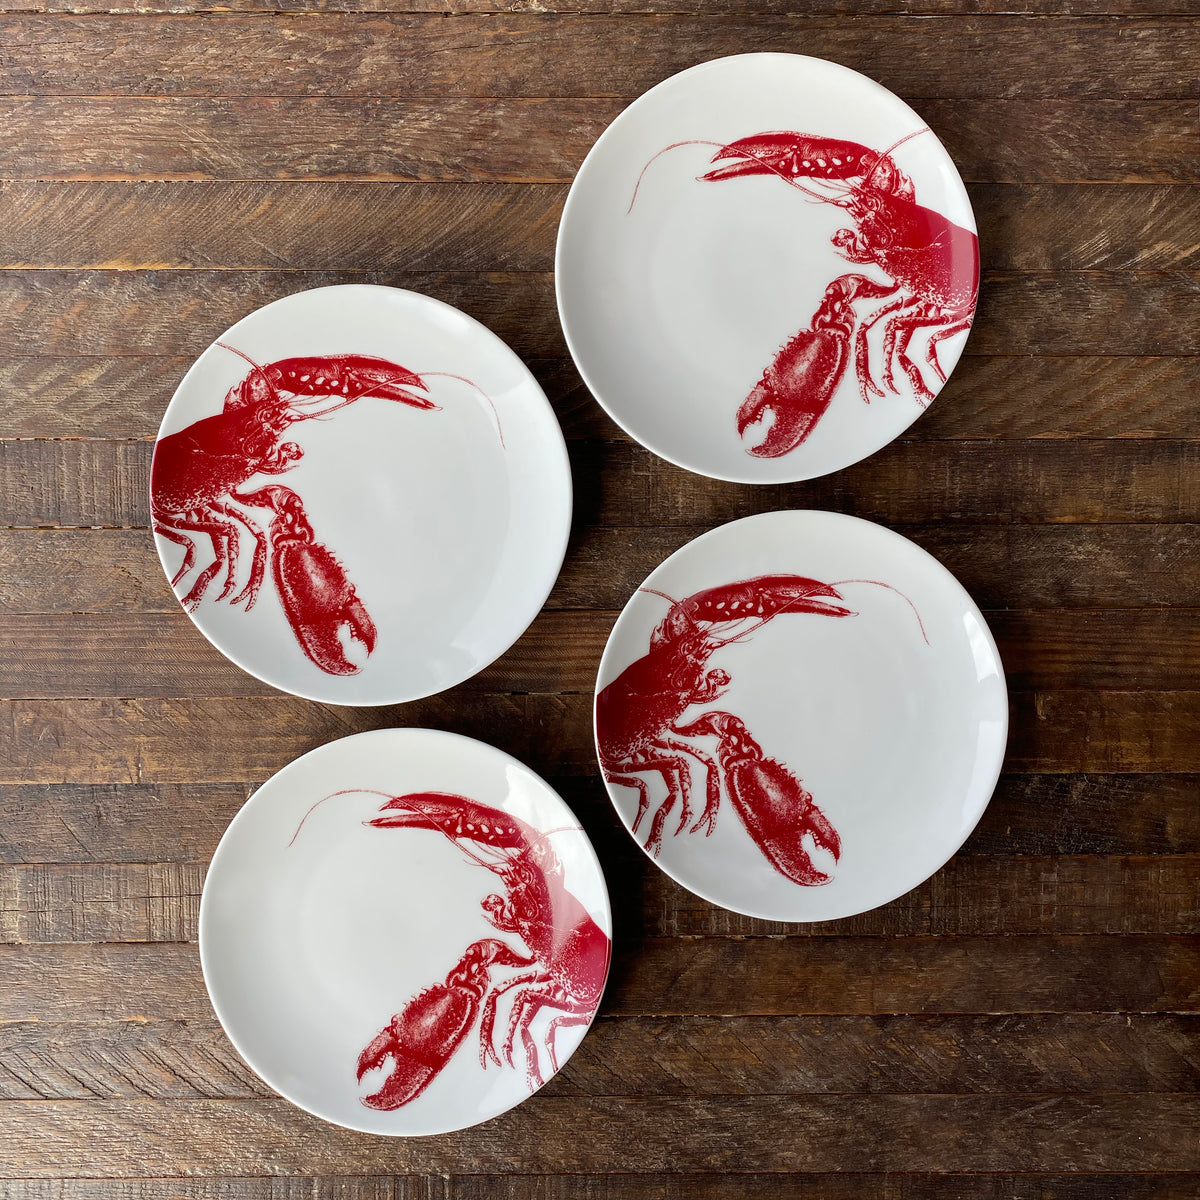 Four porcelain plates, each showcasing a red lobster illustration, are arranged in a circle on a wooden surface. This elegant Beach Wedding Bundle by Caskata adds a touch of coastal charm to your table setting.